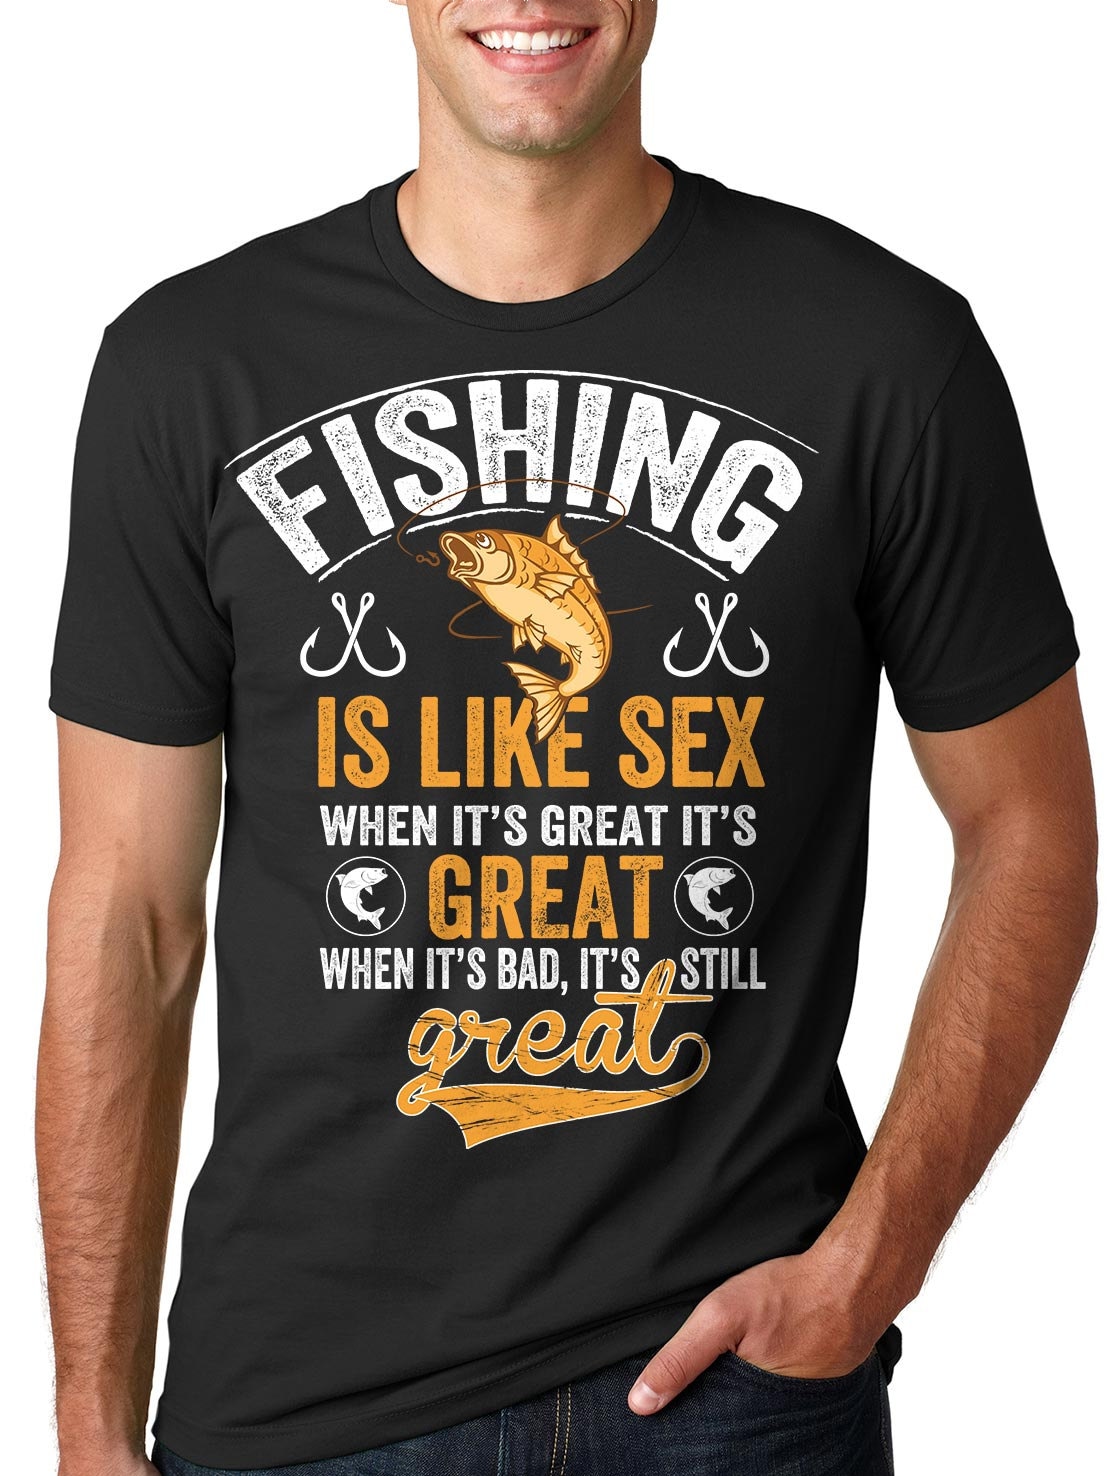 3. How to Find the Right Fishing T-Shirt and Bracelet Set for Your Style